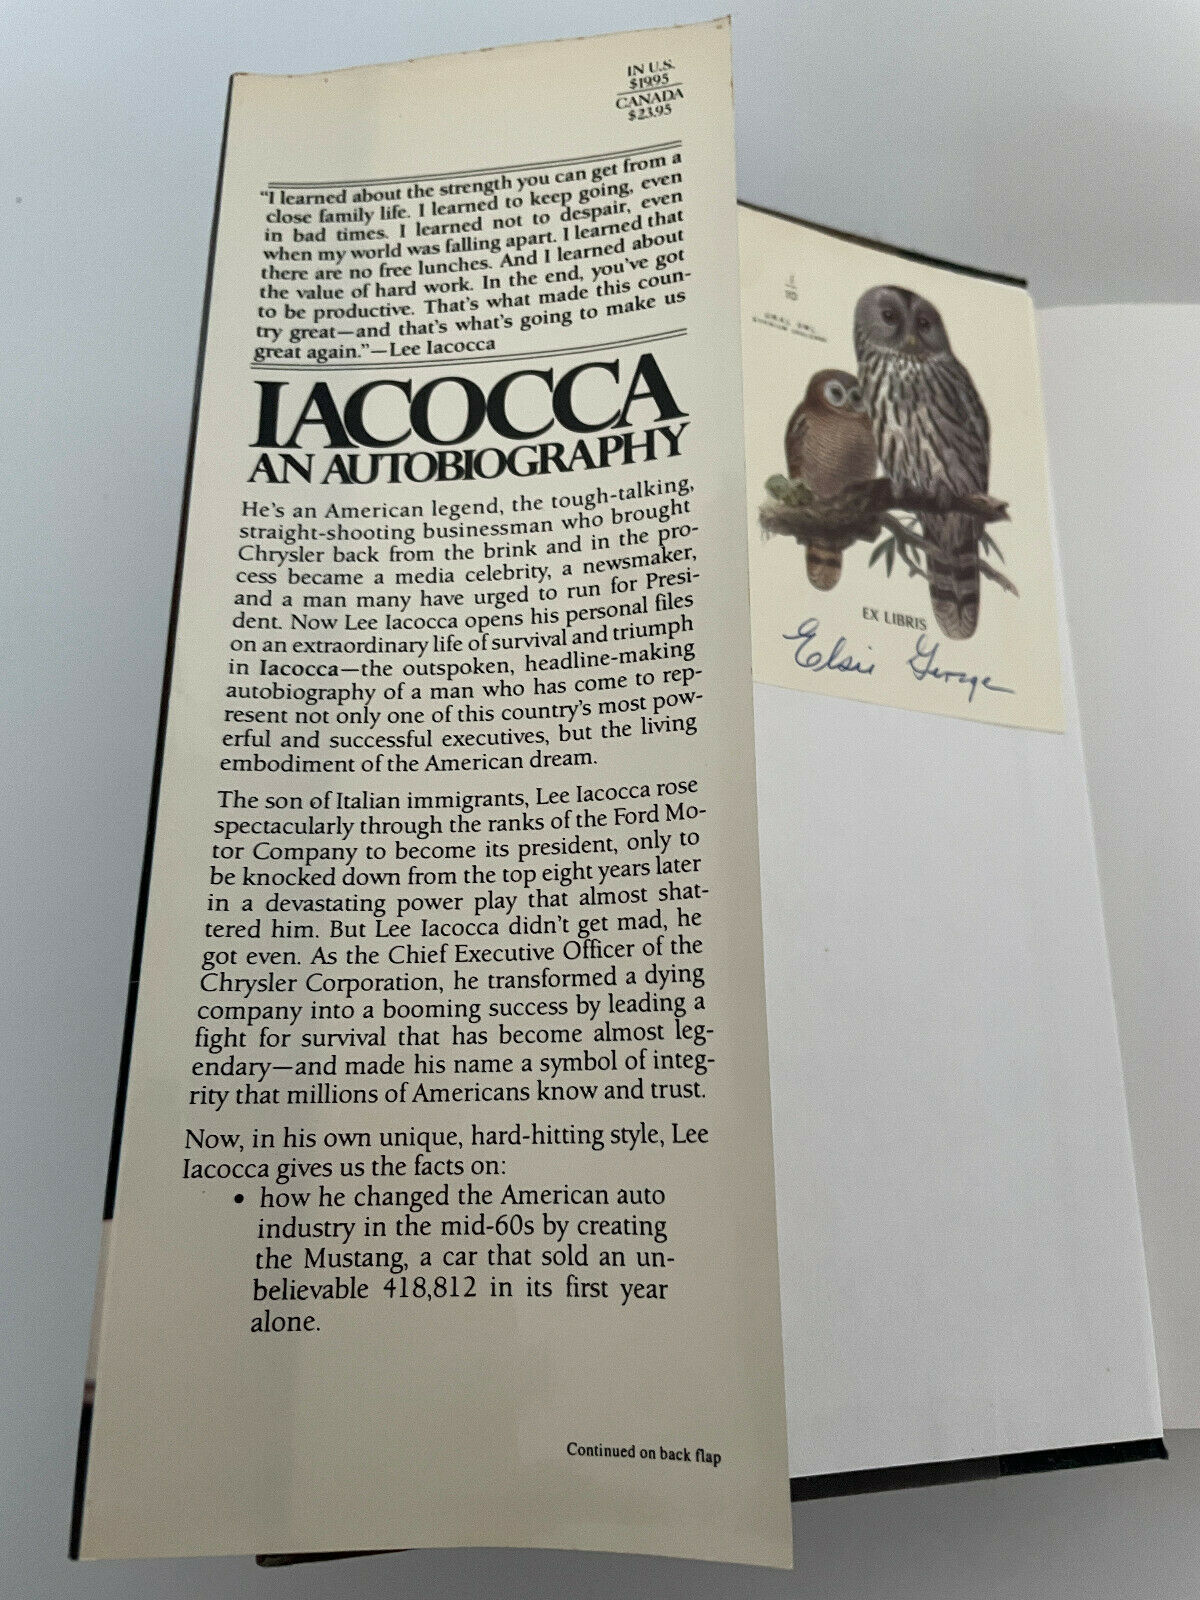 Iacocca: An Autobiography (1984) Book by Lee Iacocca, Celebrity Businessman (A2)